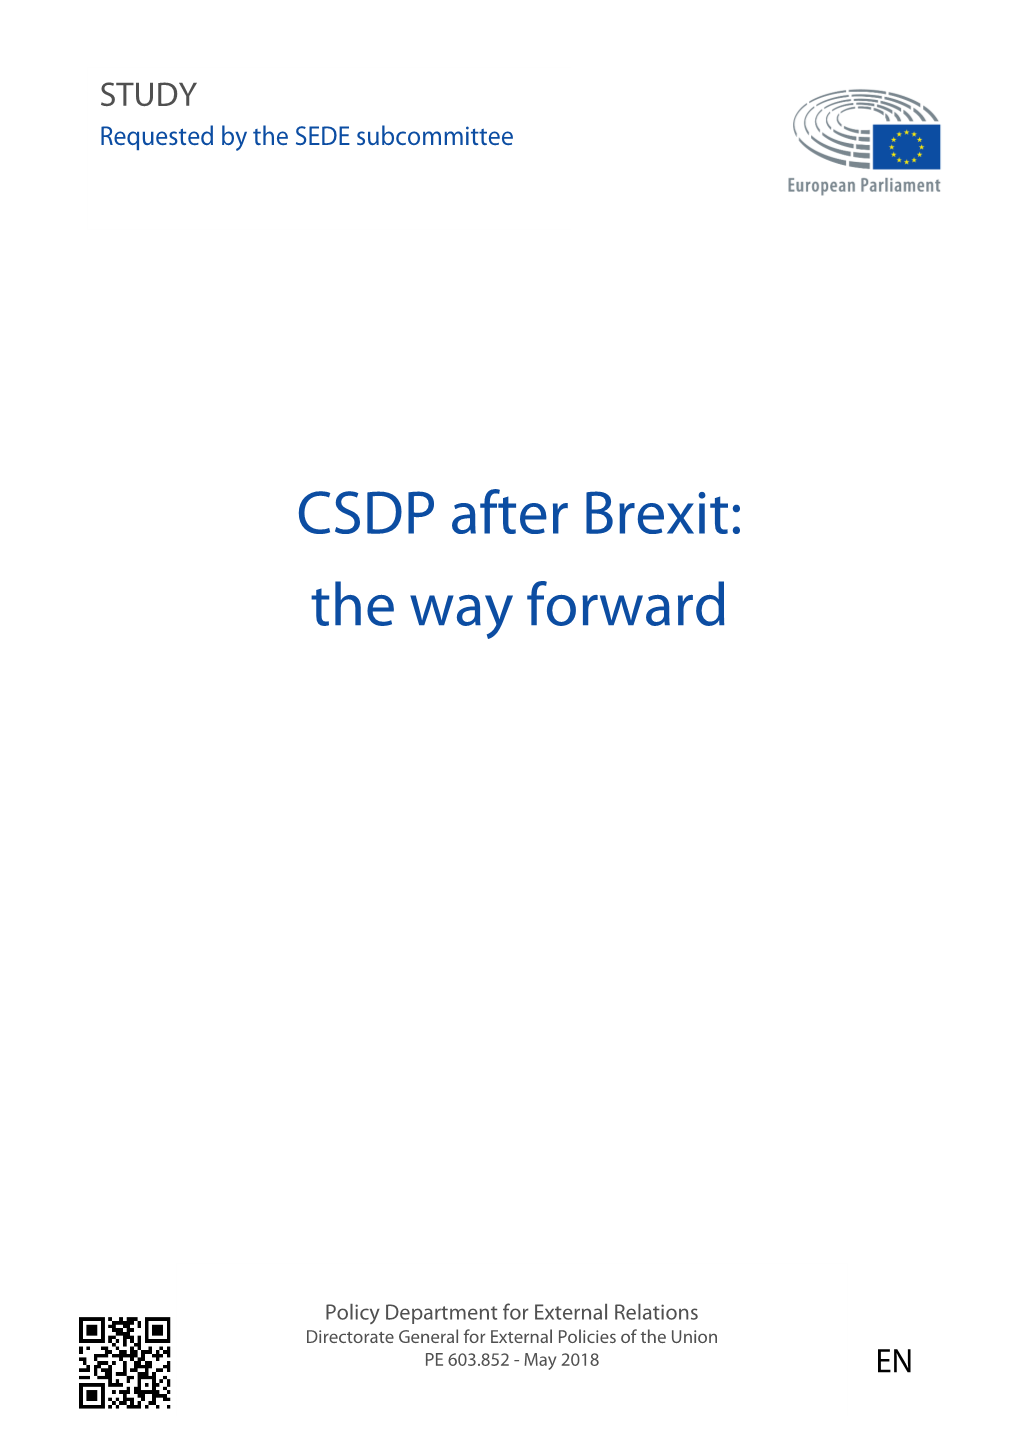 CSDP After Brexit: the Way Forward